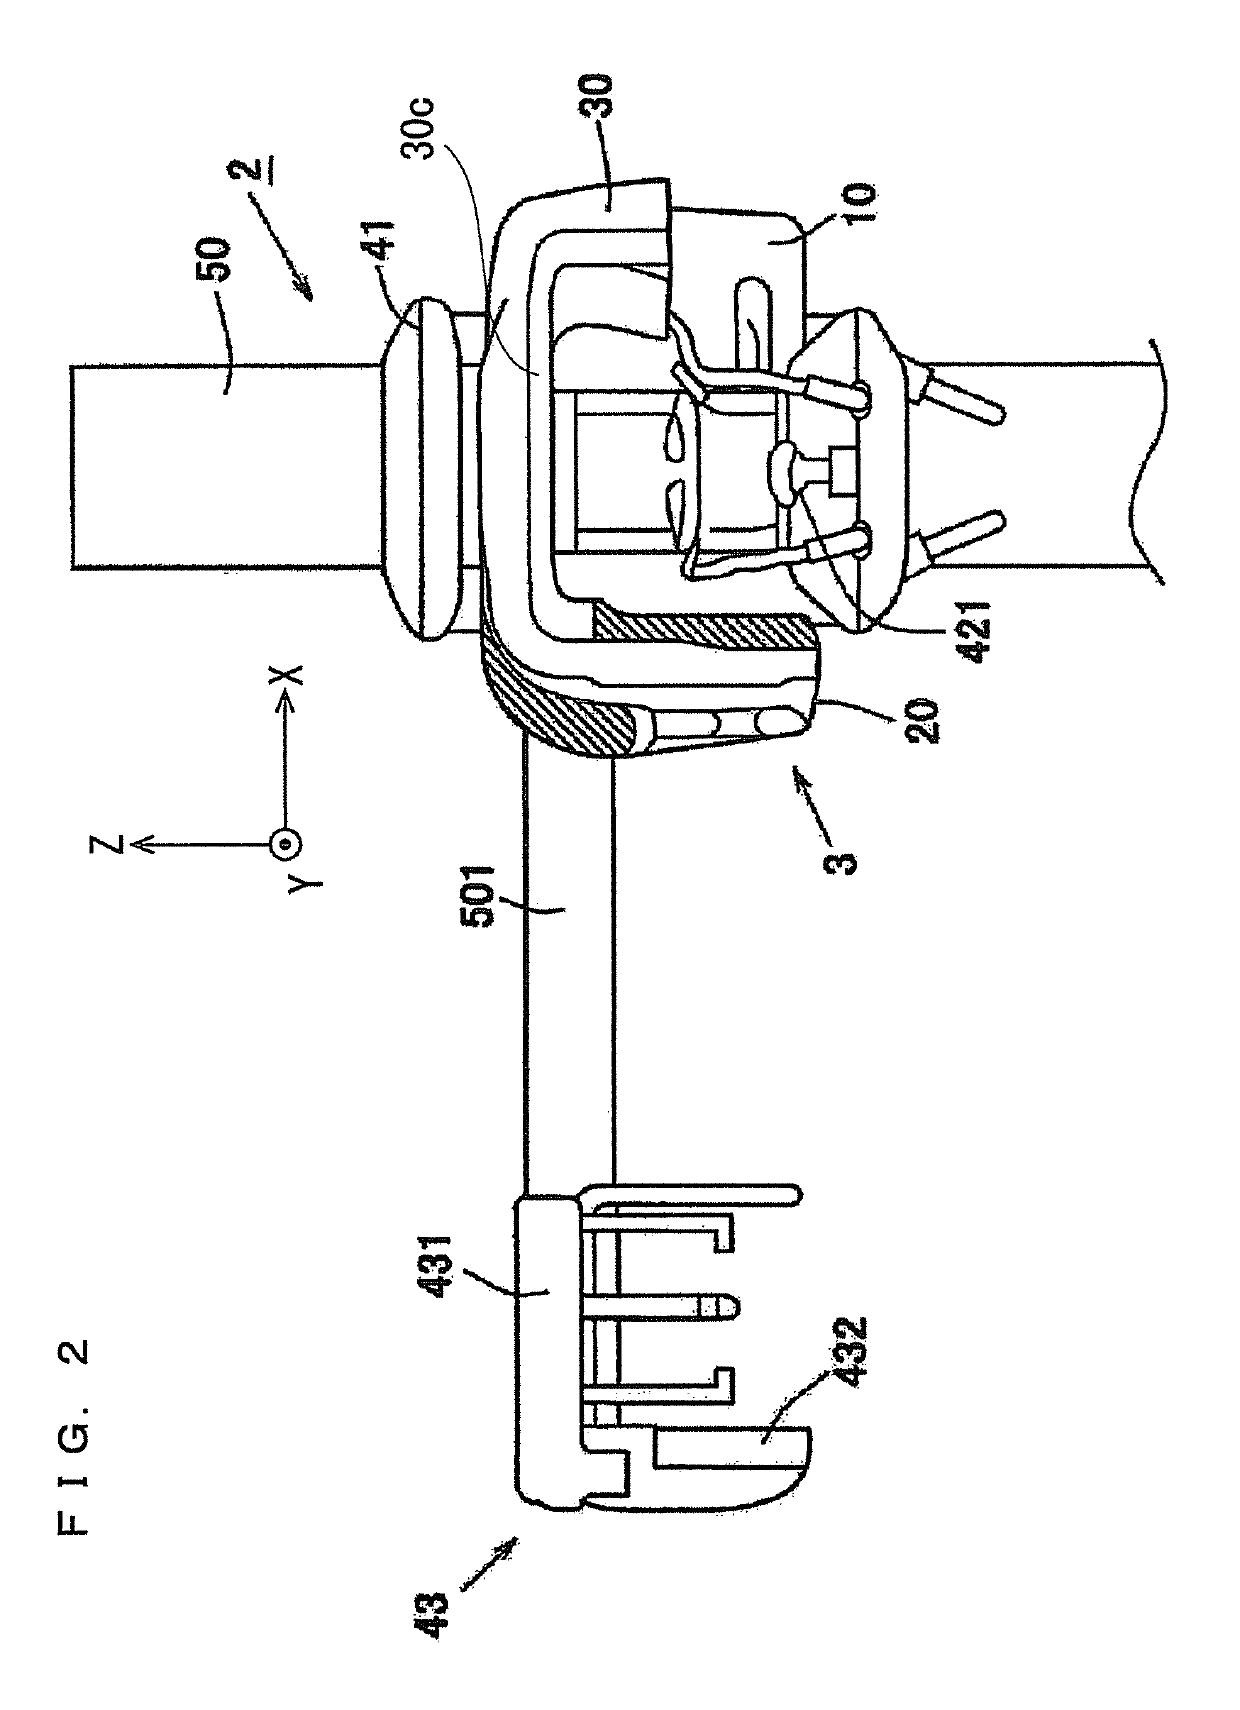 Medical X-ray photography apparatus for pseudo intraoral radiography with user interface with rectangular frame lines